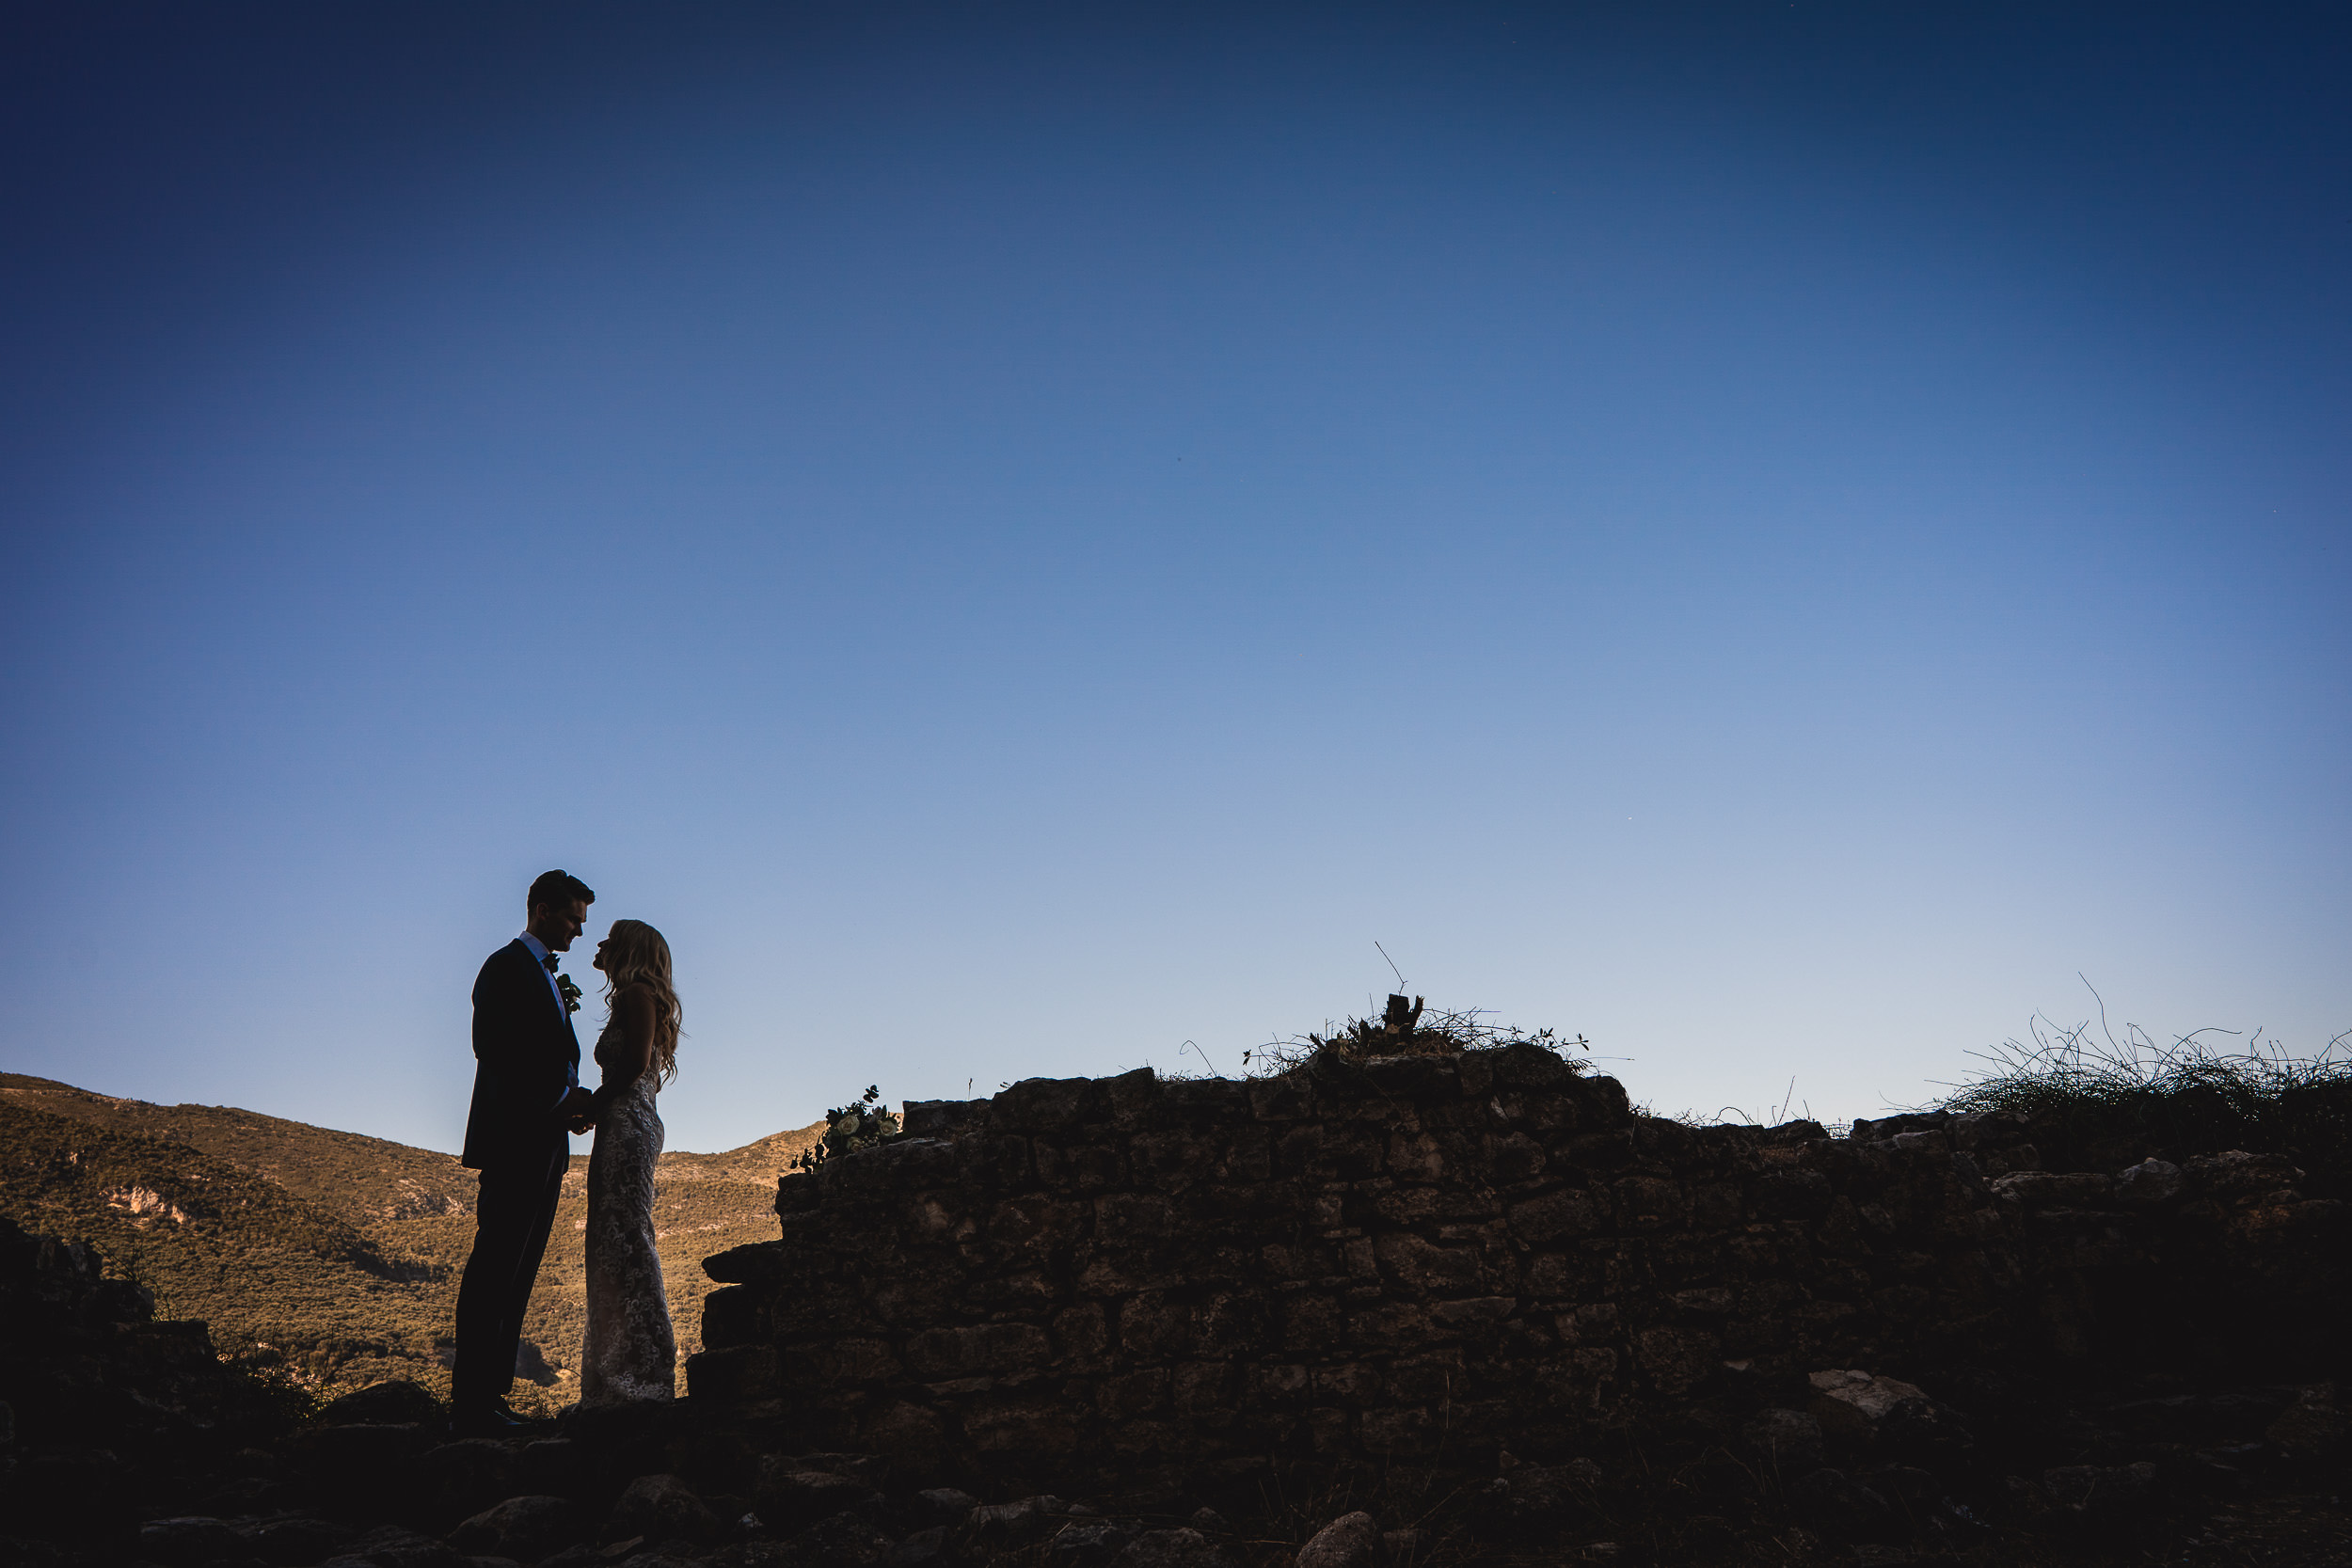 A wedding couple posing for their wedding photographer amidst ruins at sunset.